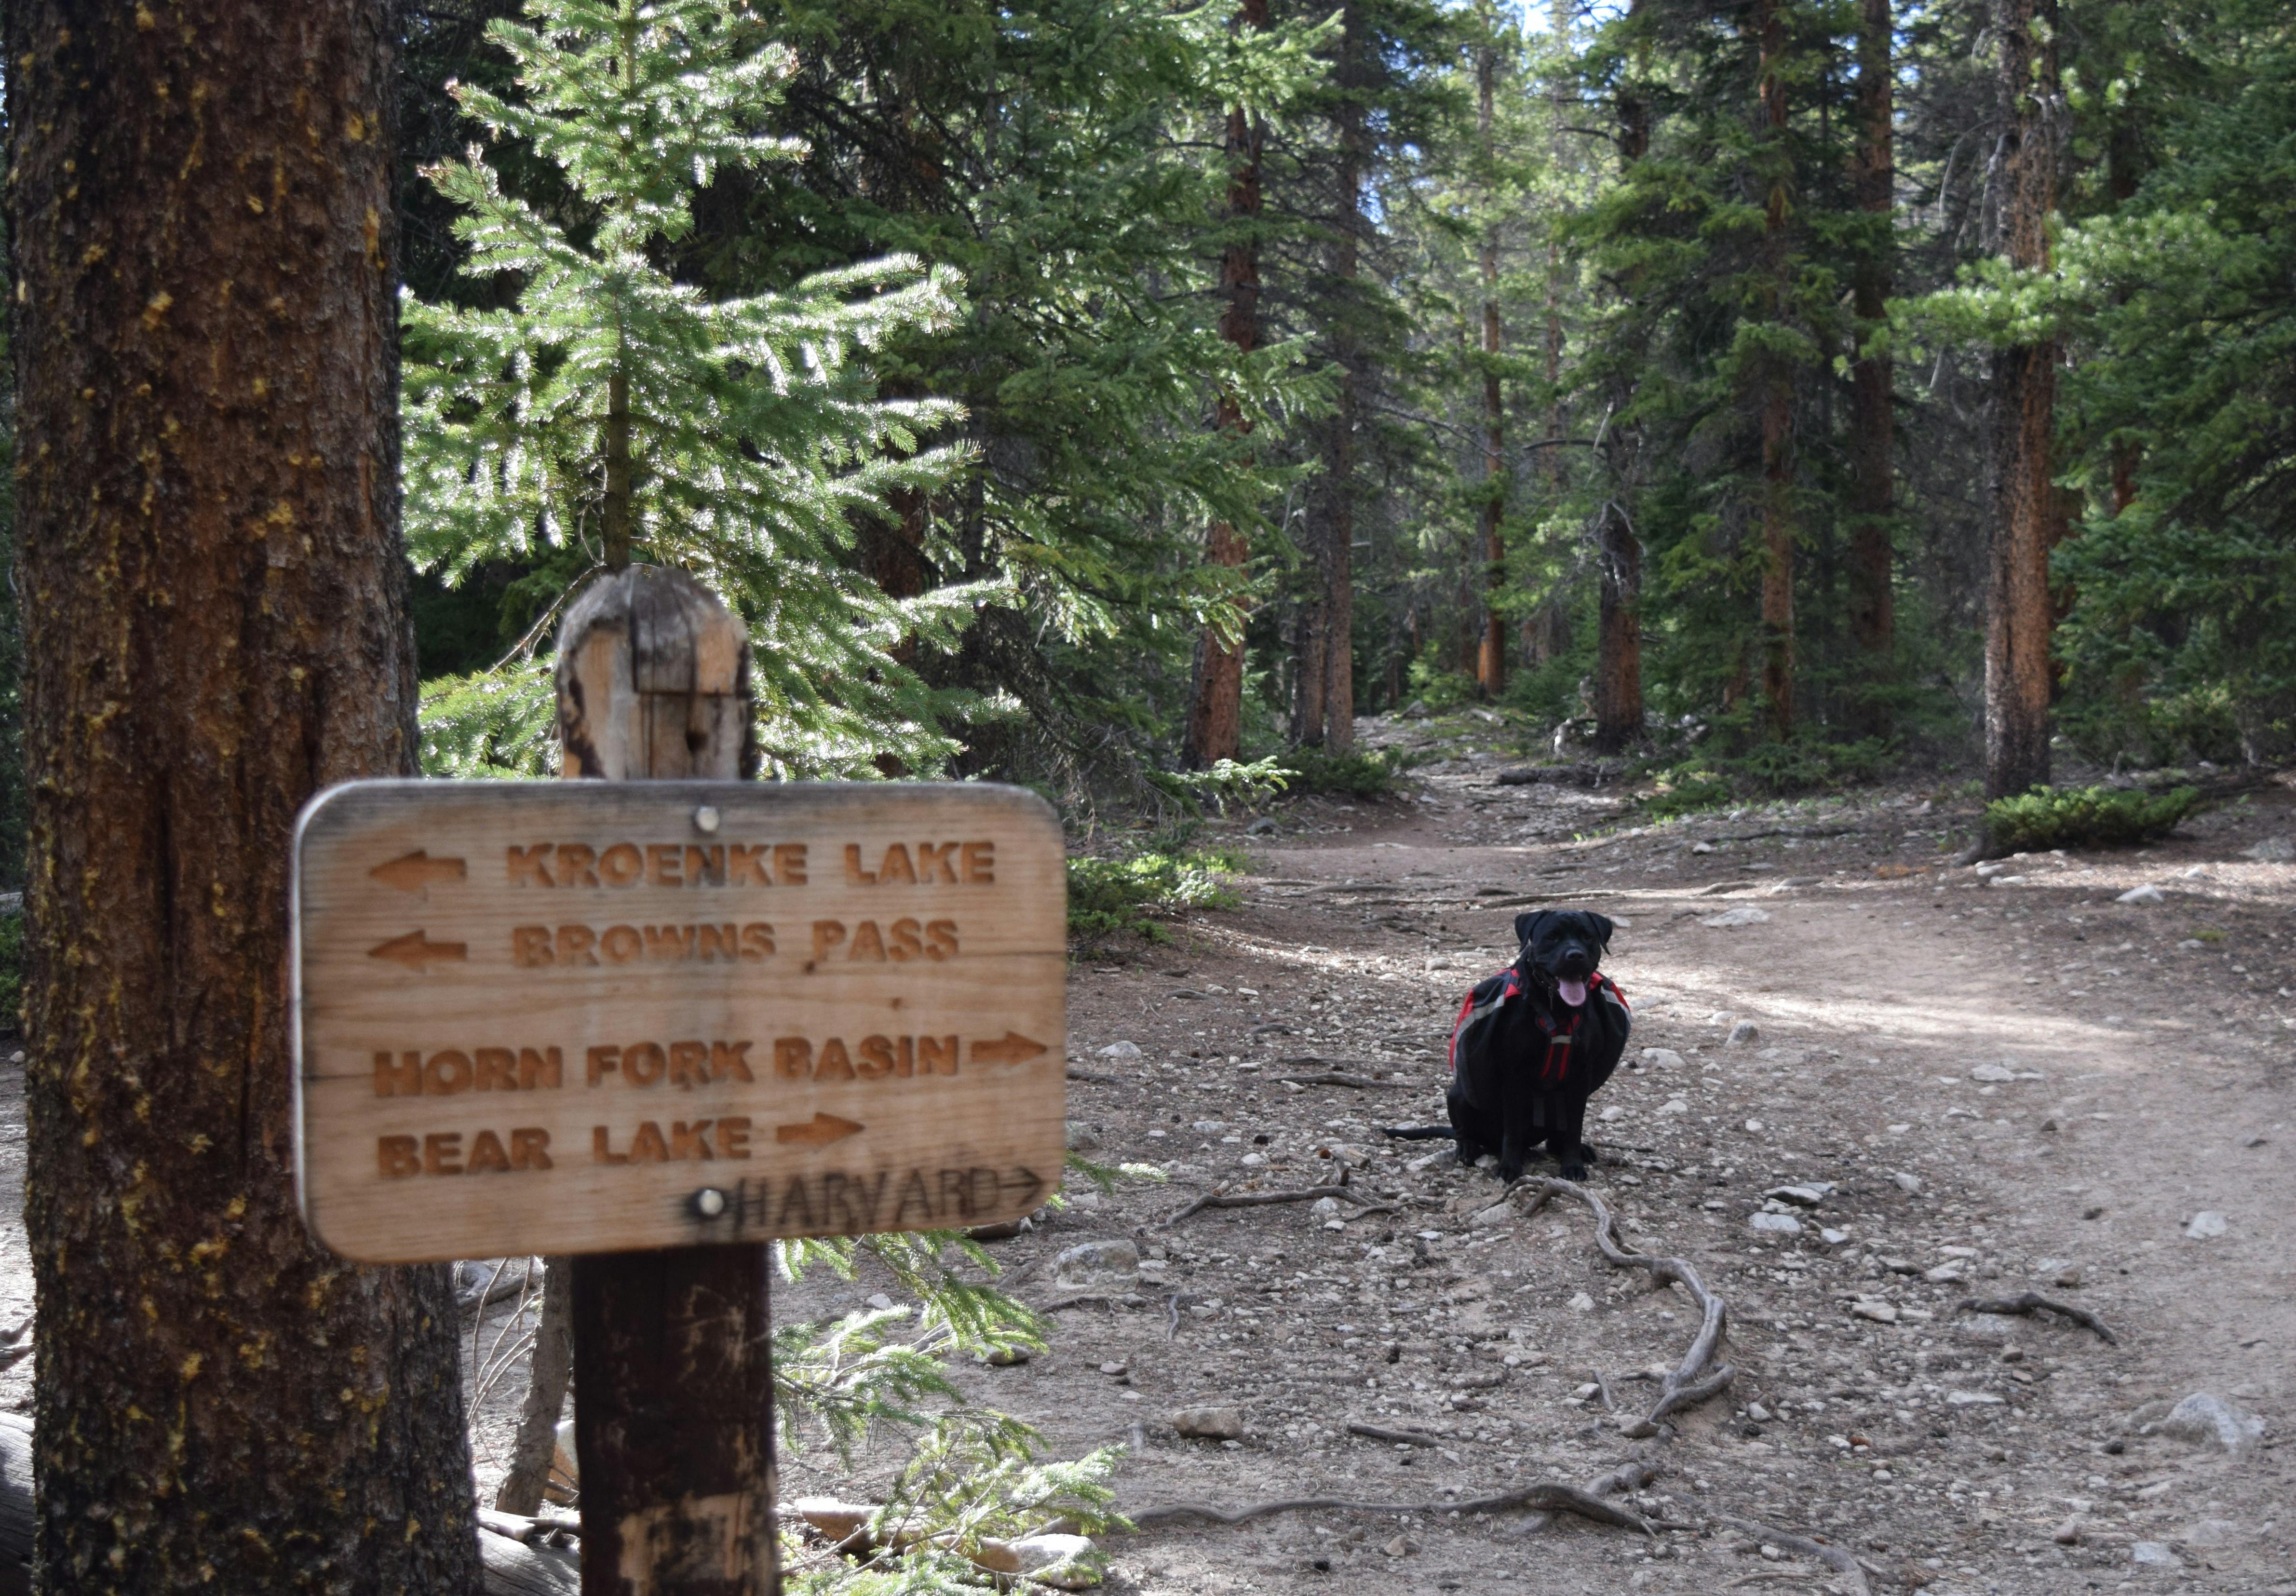 A wooden sign indicating where each trail starts and a black lab dog in a red jacket waiting patiently for guidance on where to go next